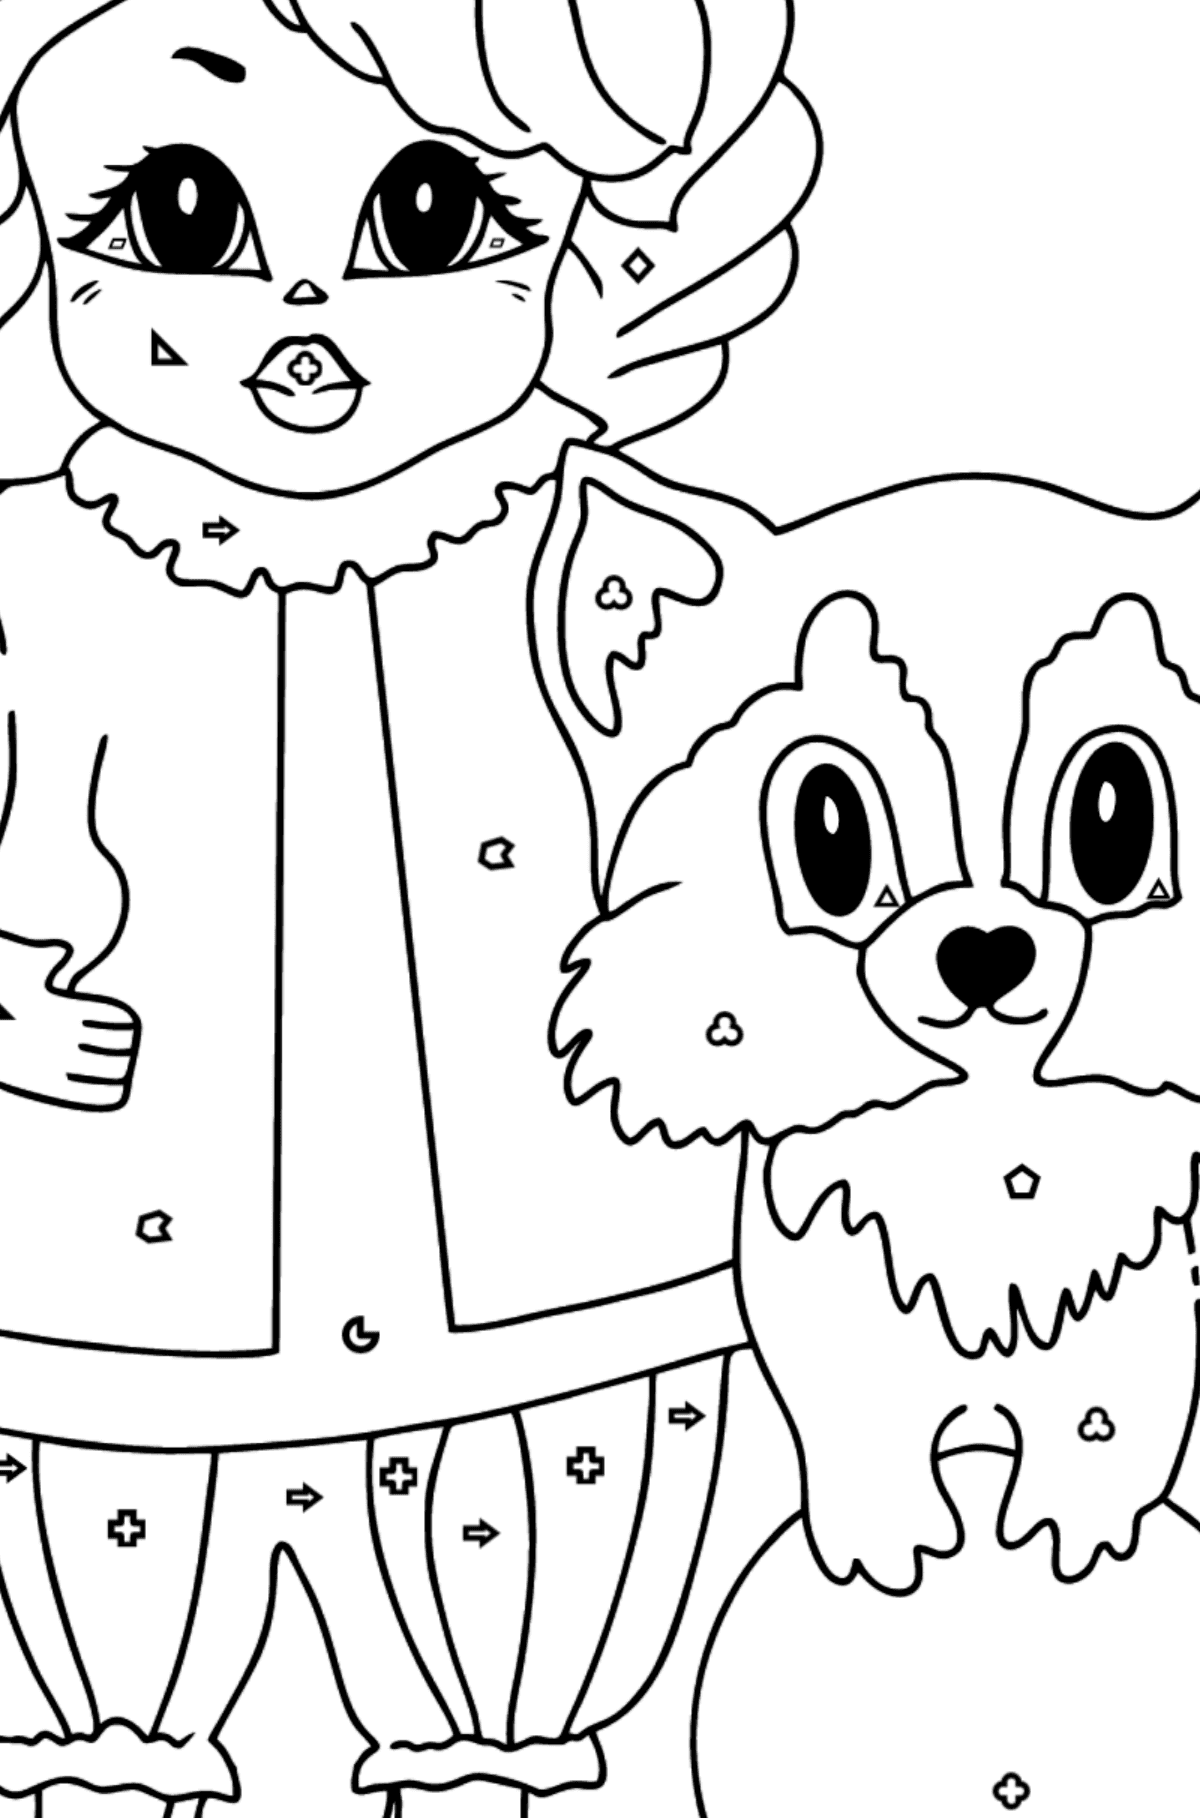 Coloring Page - A Princess with a Cat and a Racoon - Coloring by Geometric Shapes for Kids